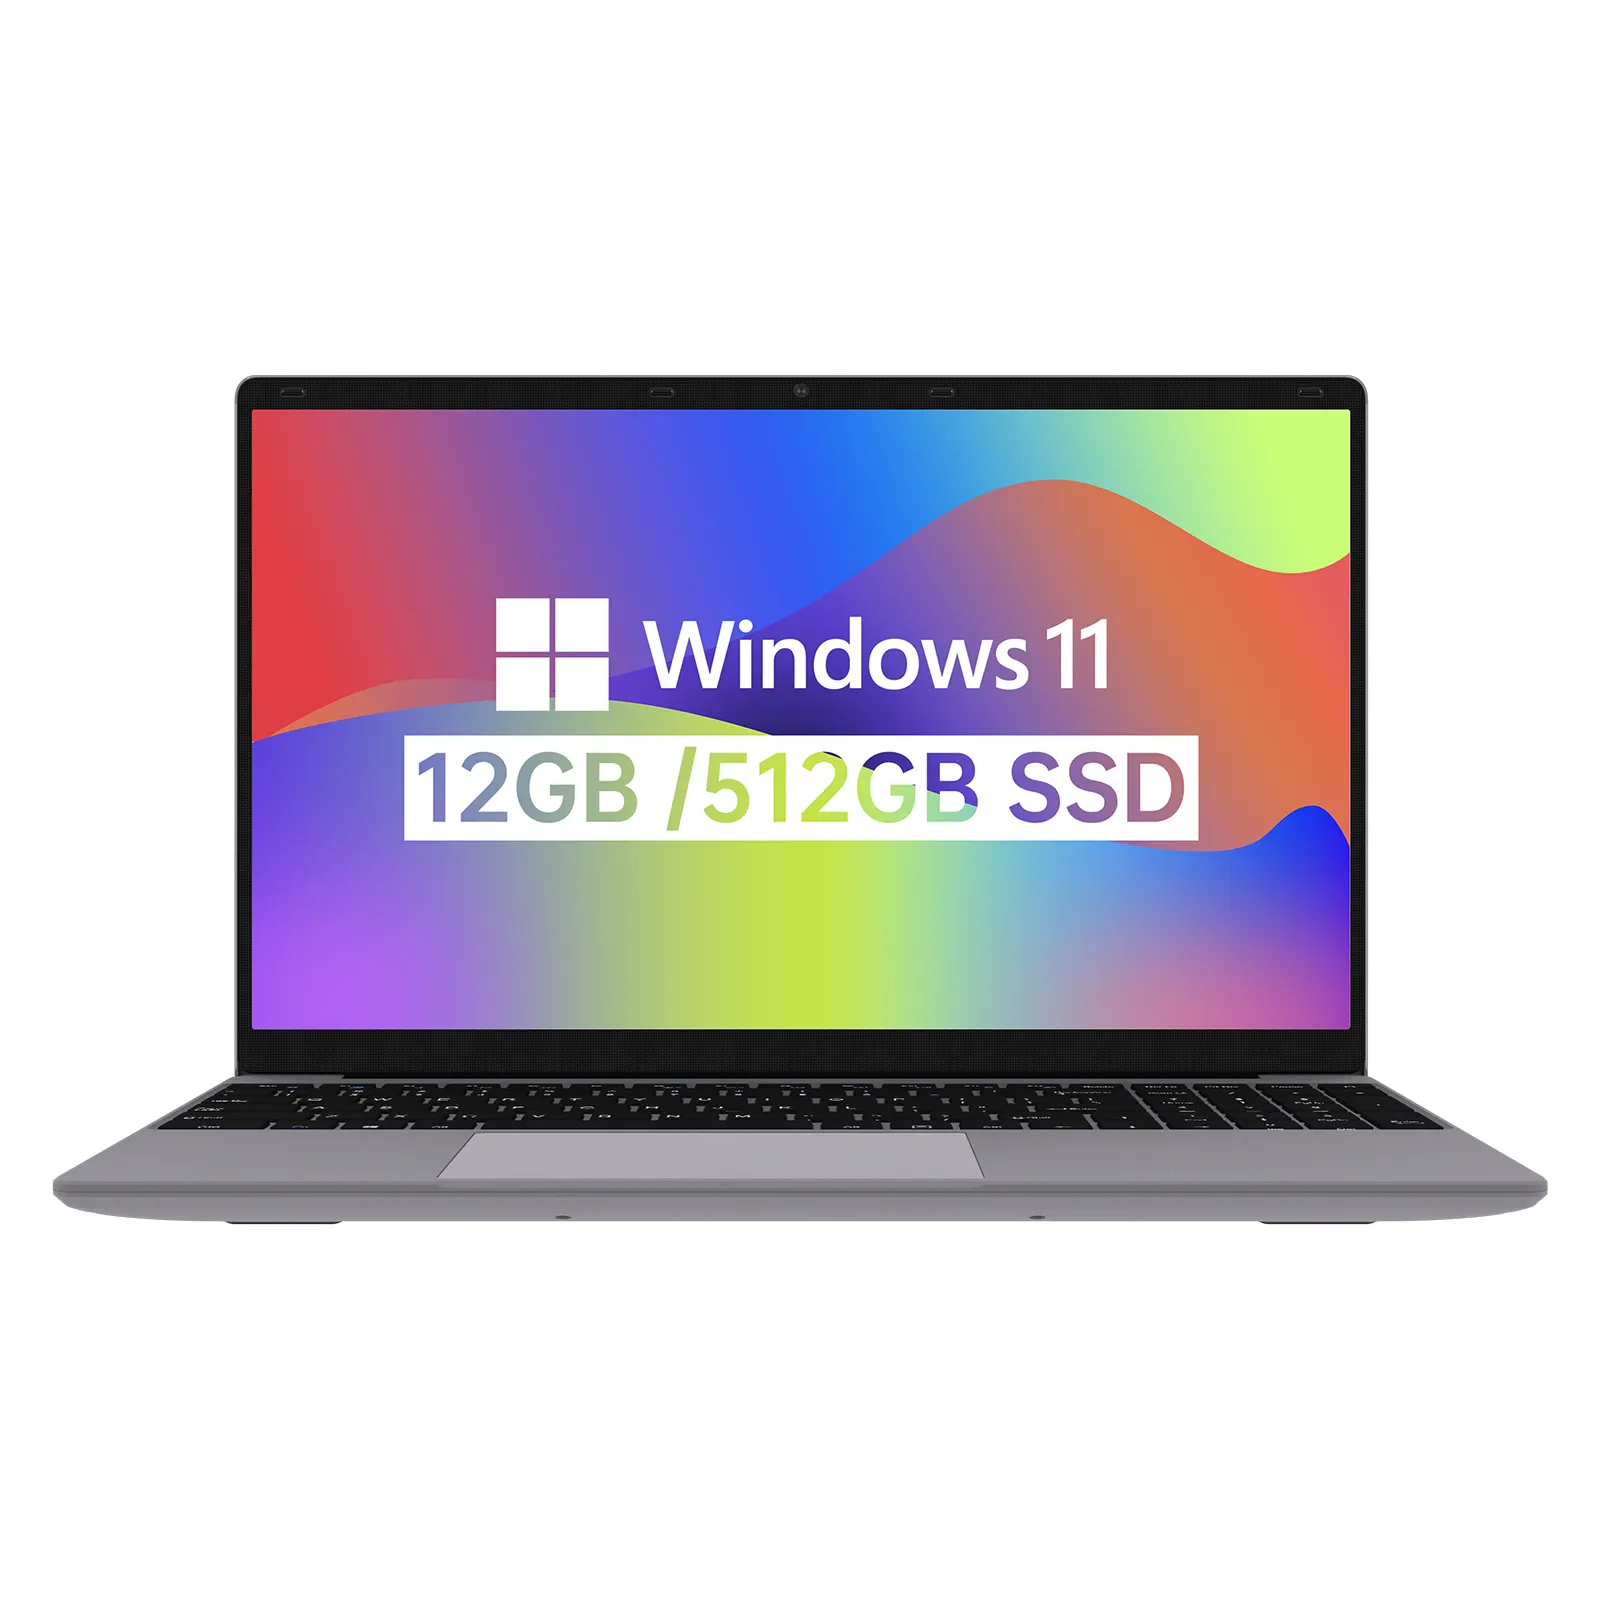 OEM Brand New Intel 11th Gen N5095 Laptop 12GB Ram 512GB SSD Win11 Home Portable 15.6 Notebook Computer with Full Size Keyboard